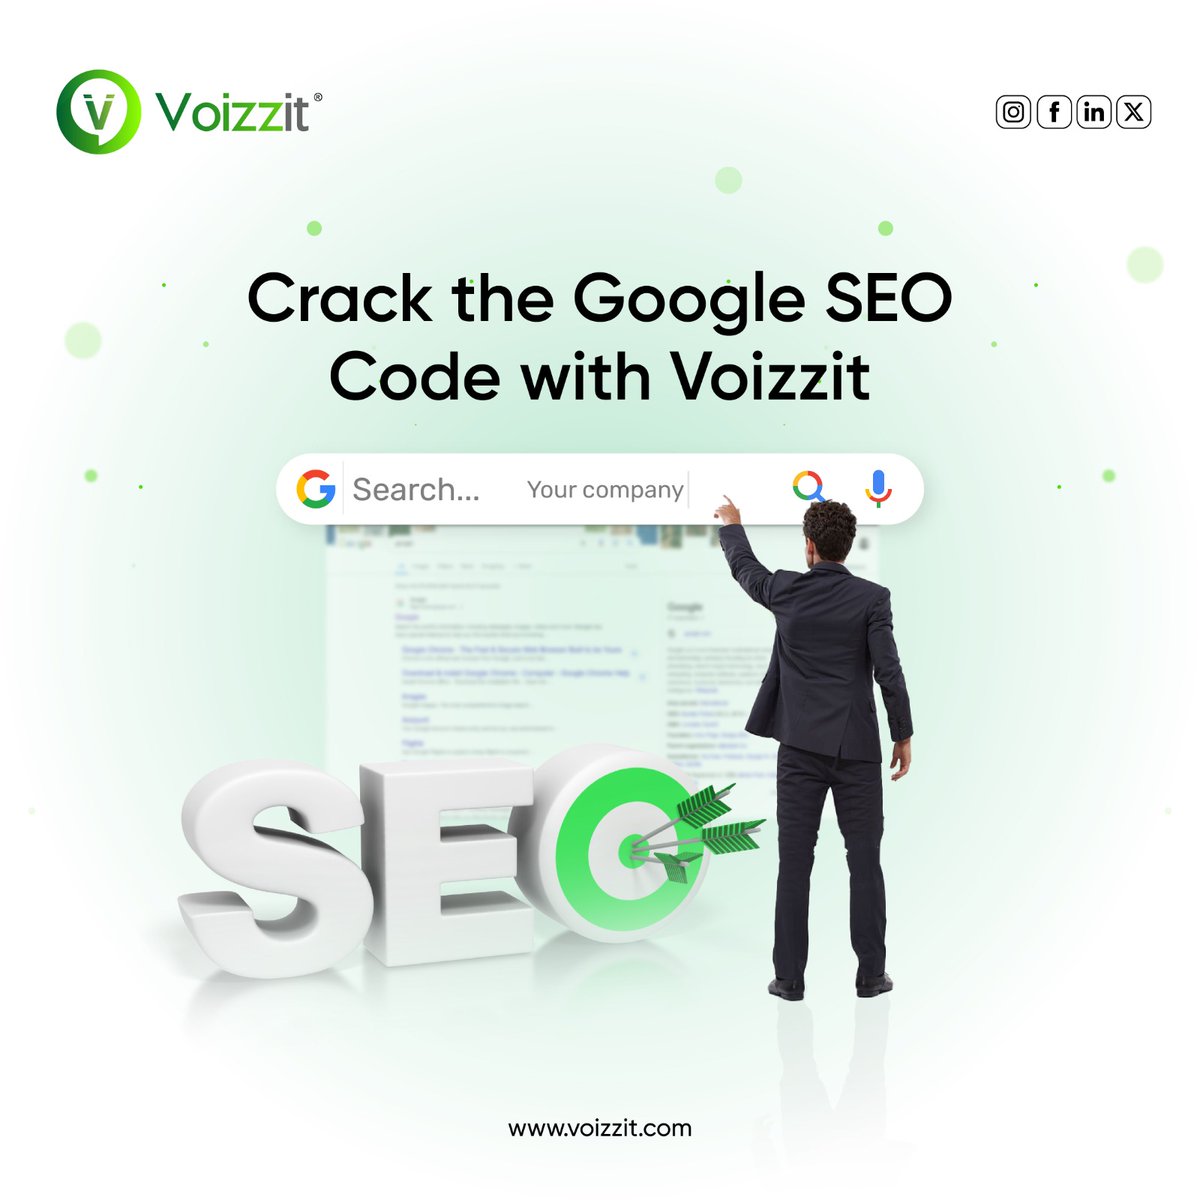 Boost your online visibility with Voizzit's powerful SEO keyword function. Reach more customers and climb the search engine ranks effortlessly.
.
.
#Voizzit #BusinessBranding #BrandIdentity #SEO #DigitalStrategy #SoftwareSolutions #DigitalMarketing #BrandSuccess #SEOTrends